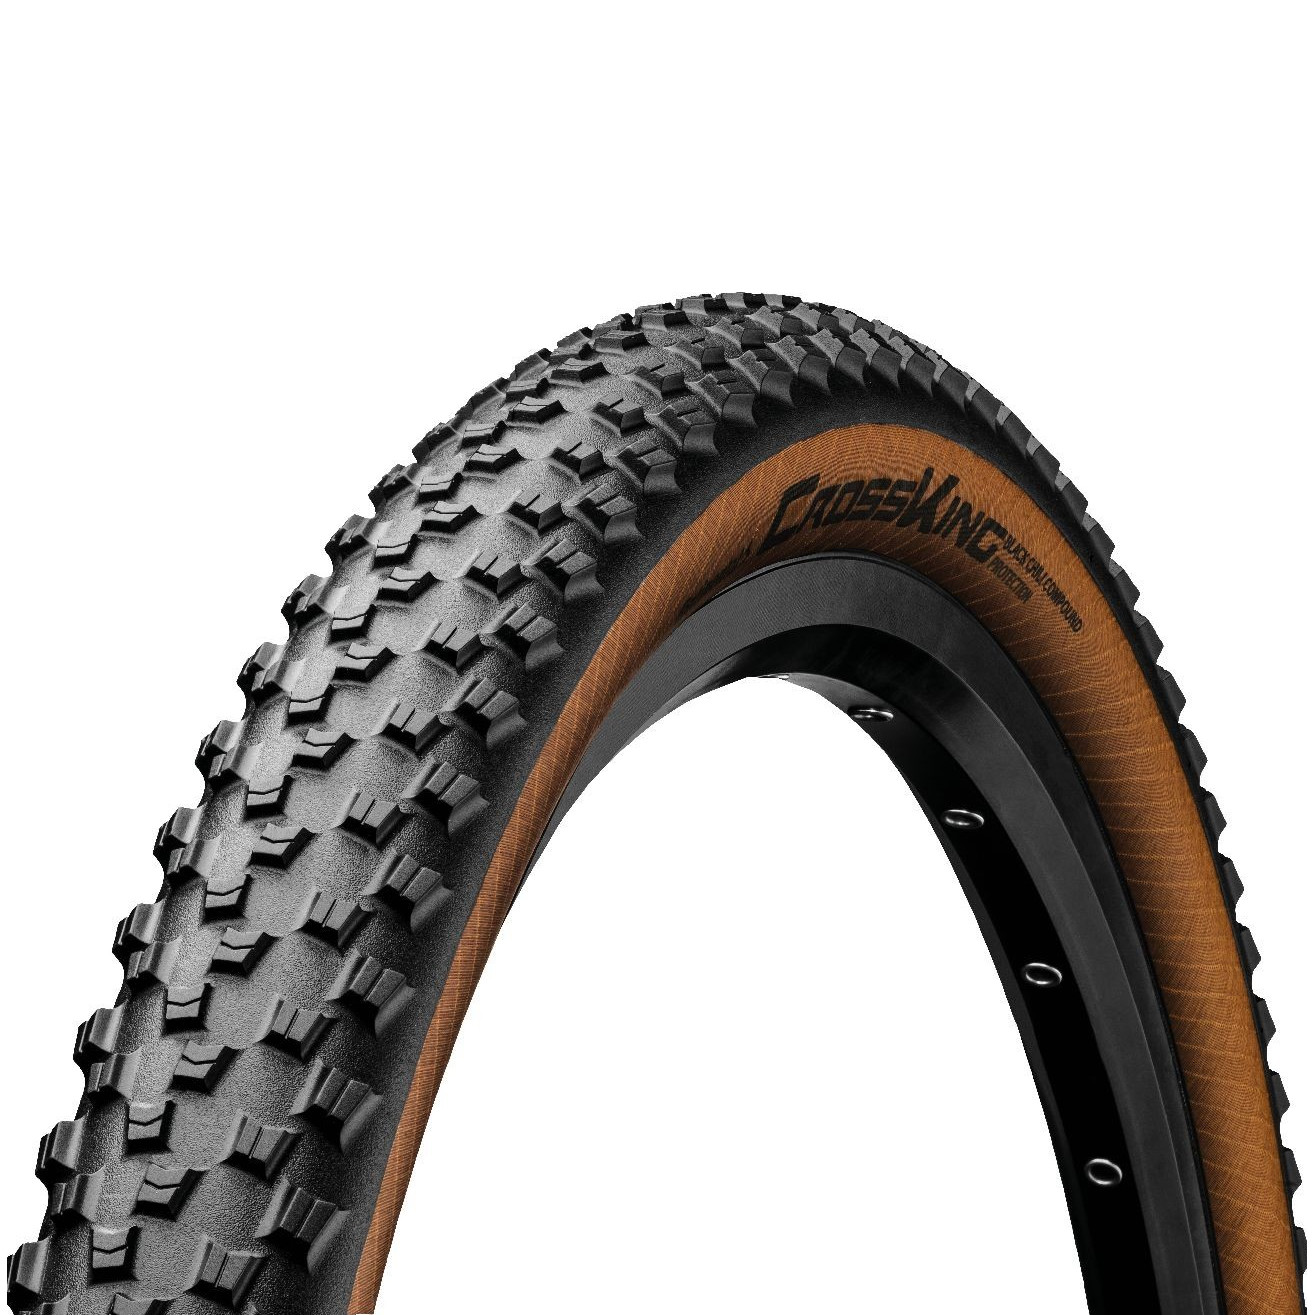 Productfoto van Continental Cross King ProTection Vouwband - 29x2.20&quot; - black/amber